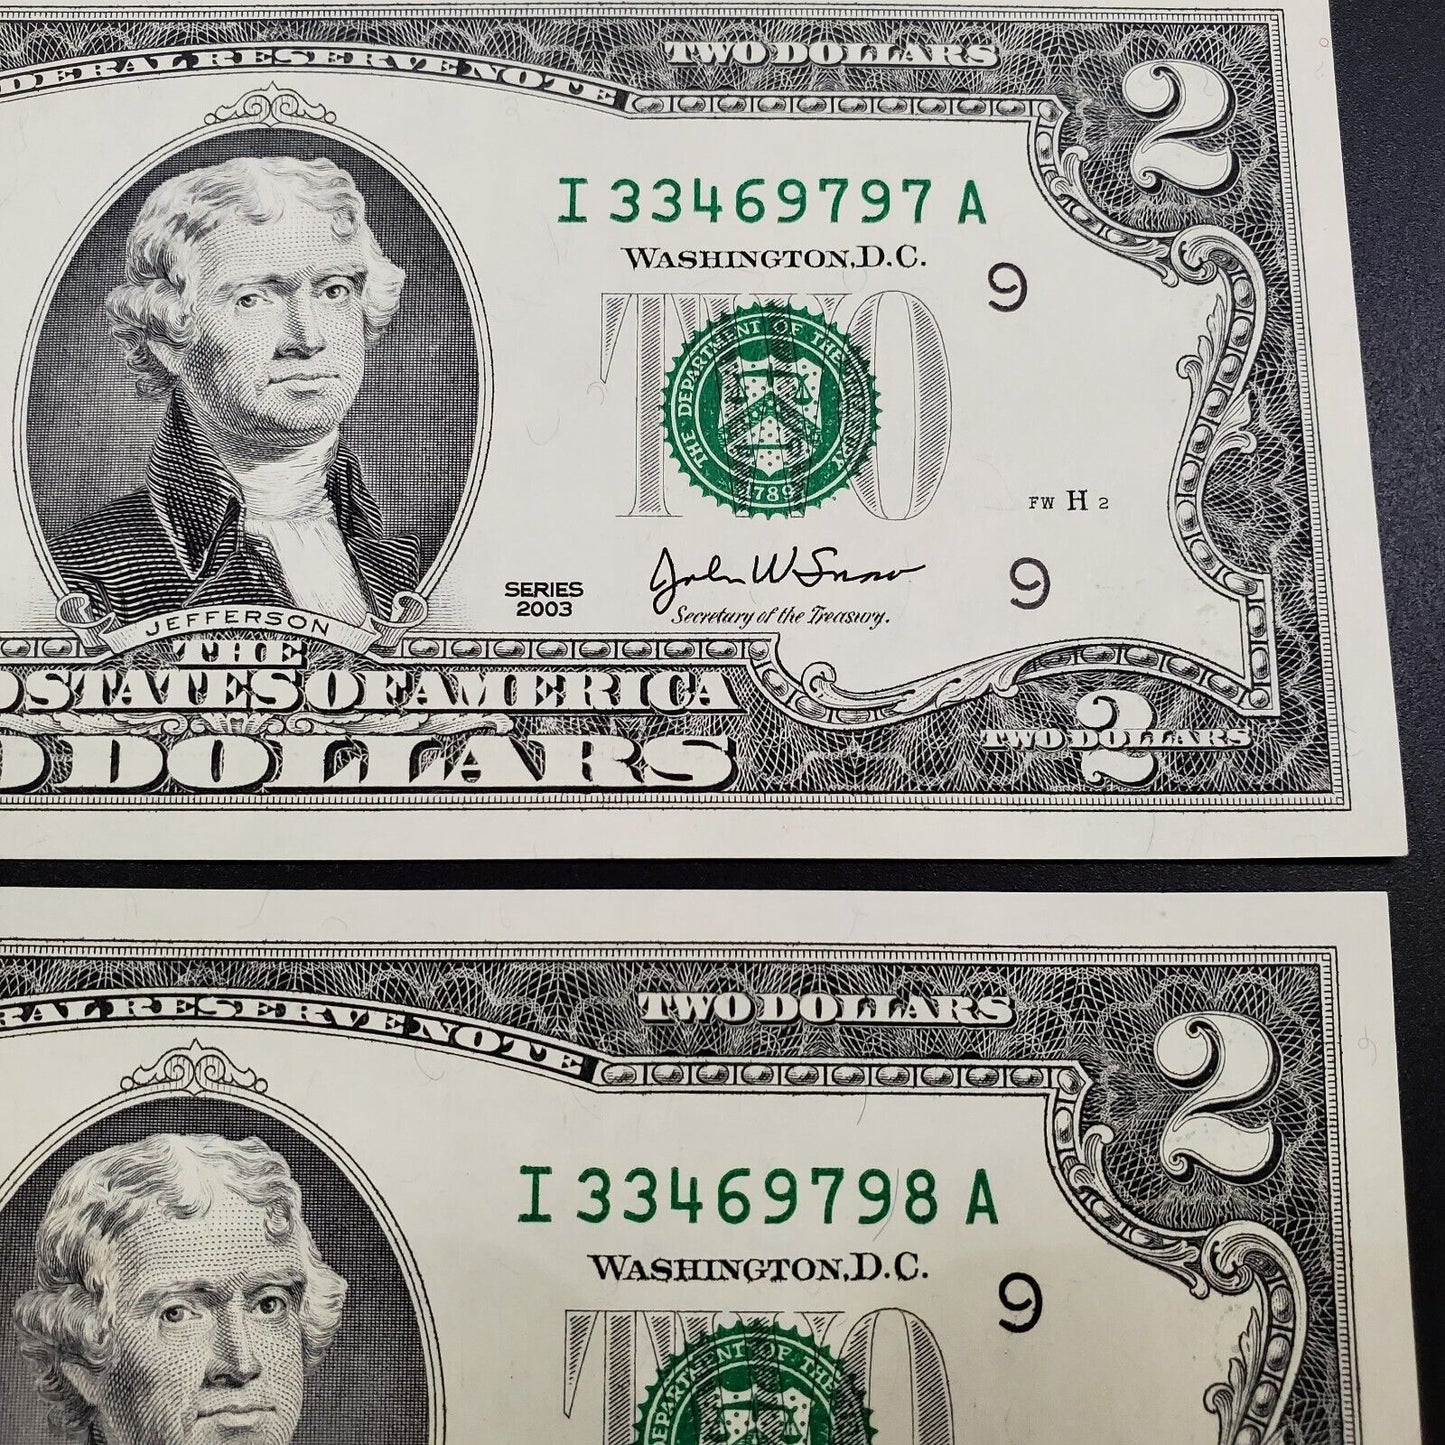 3 CONSECUTIVE $2 2003 FRN FEDERAL RESERVE NOTE UNC Two Dollar Bill Green Seal